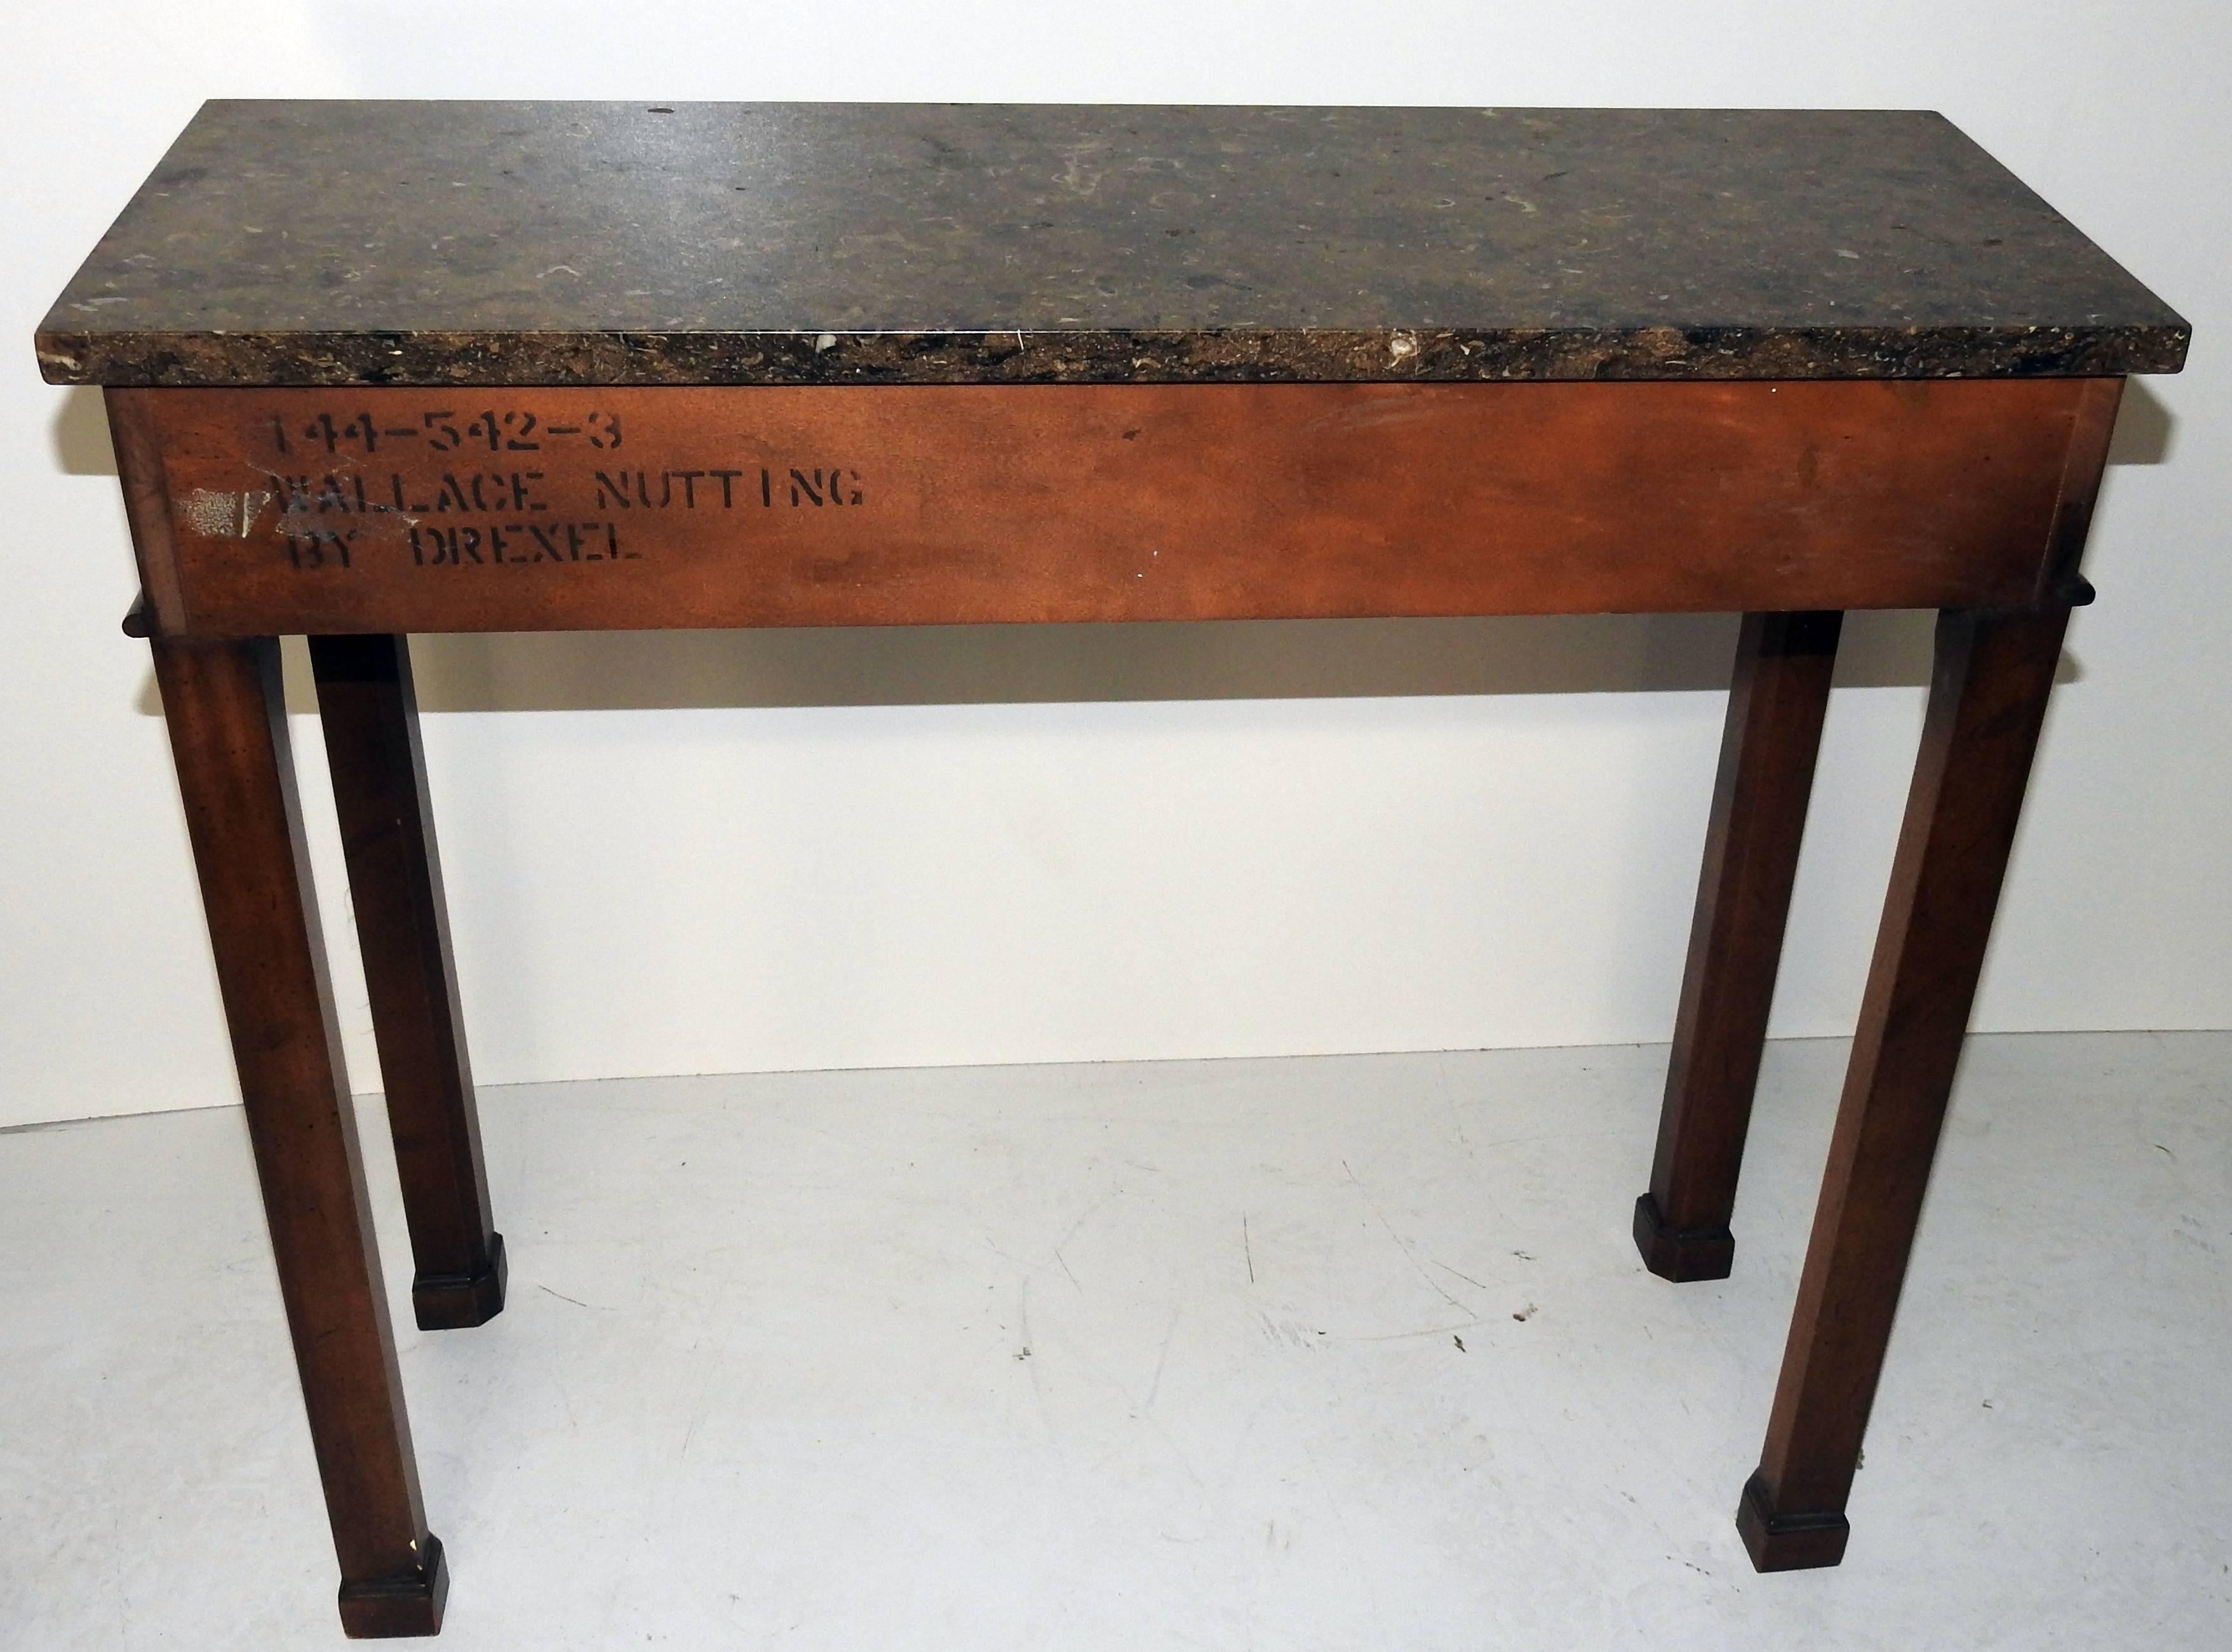 Mid-20th Century Wallace Nutting by Drexel Granite Top Console Table